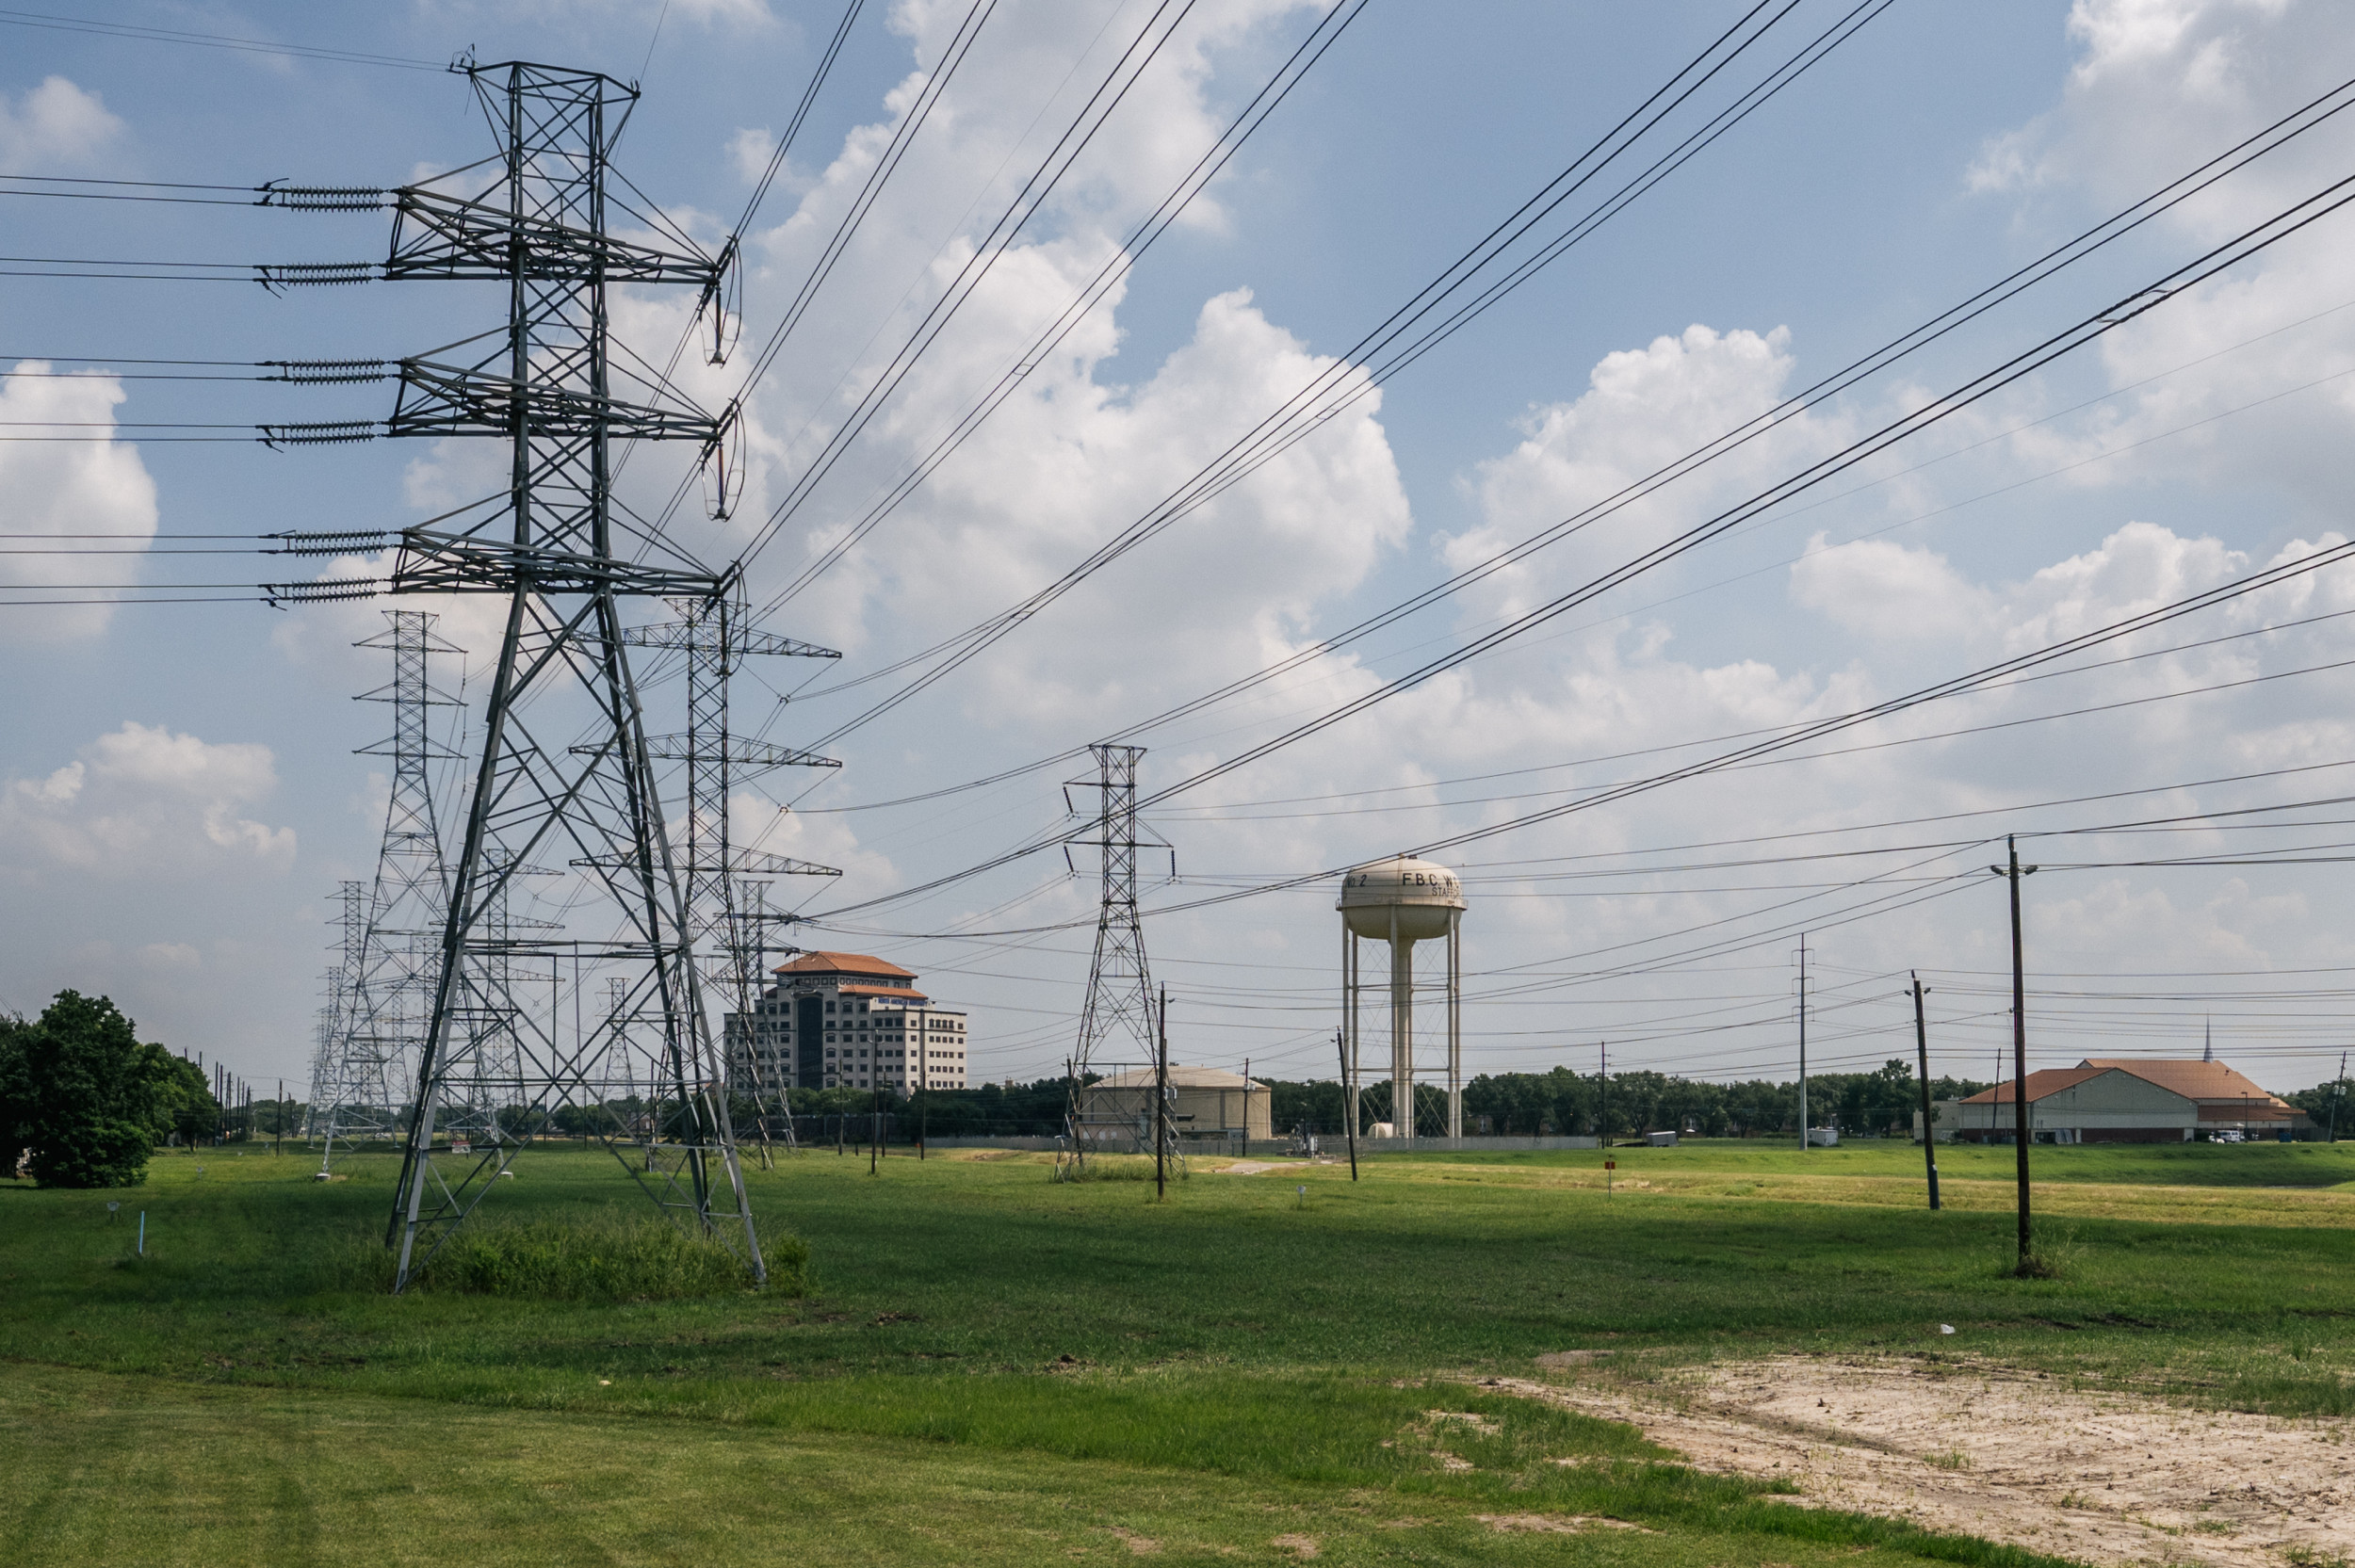 Texas power outage: More people could lose electricity, heat